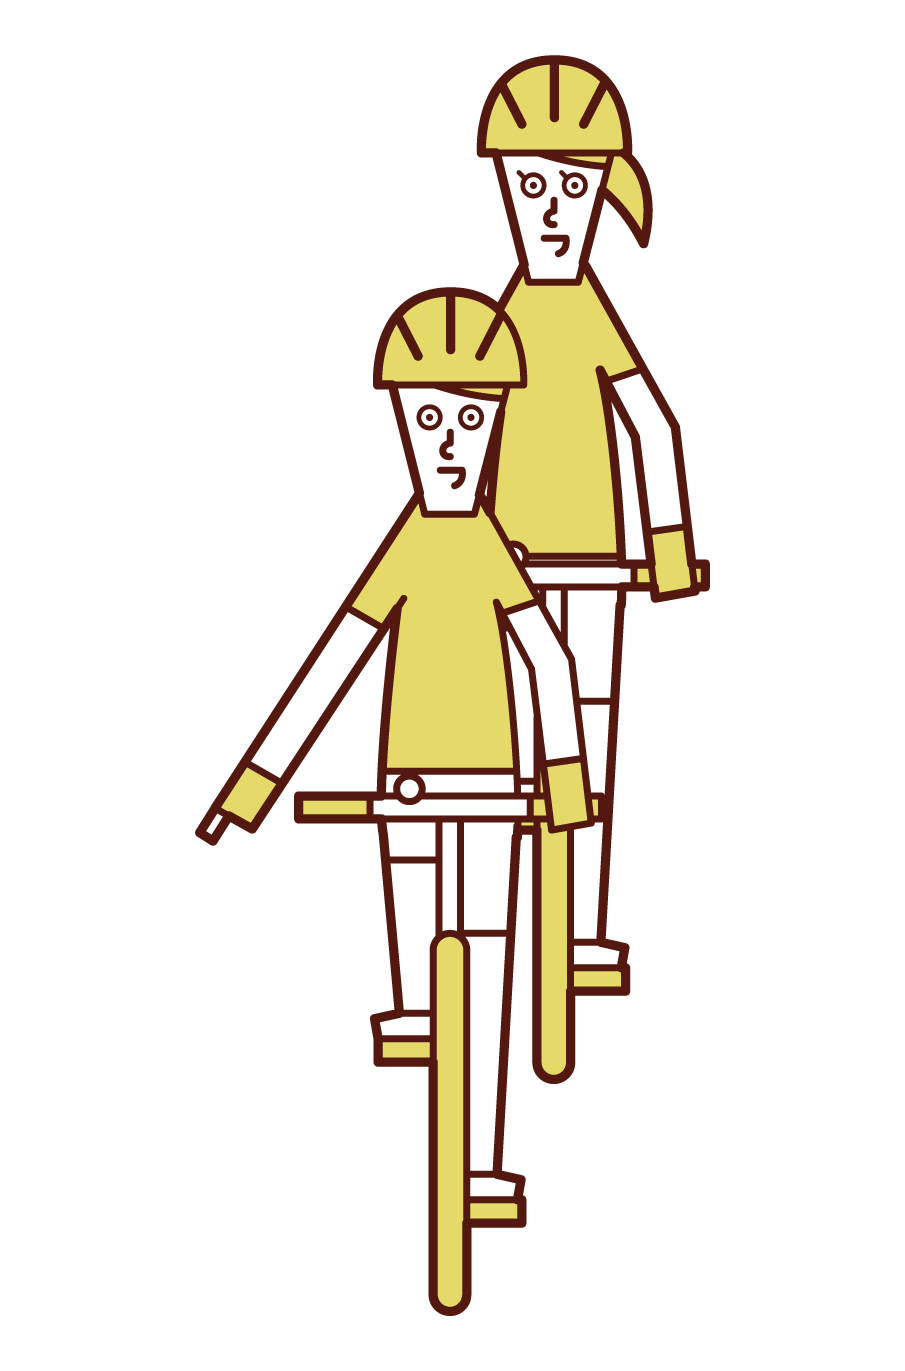 Illustration of attention (male) to the hand signal and road surface of the bicycle